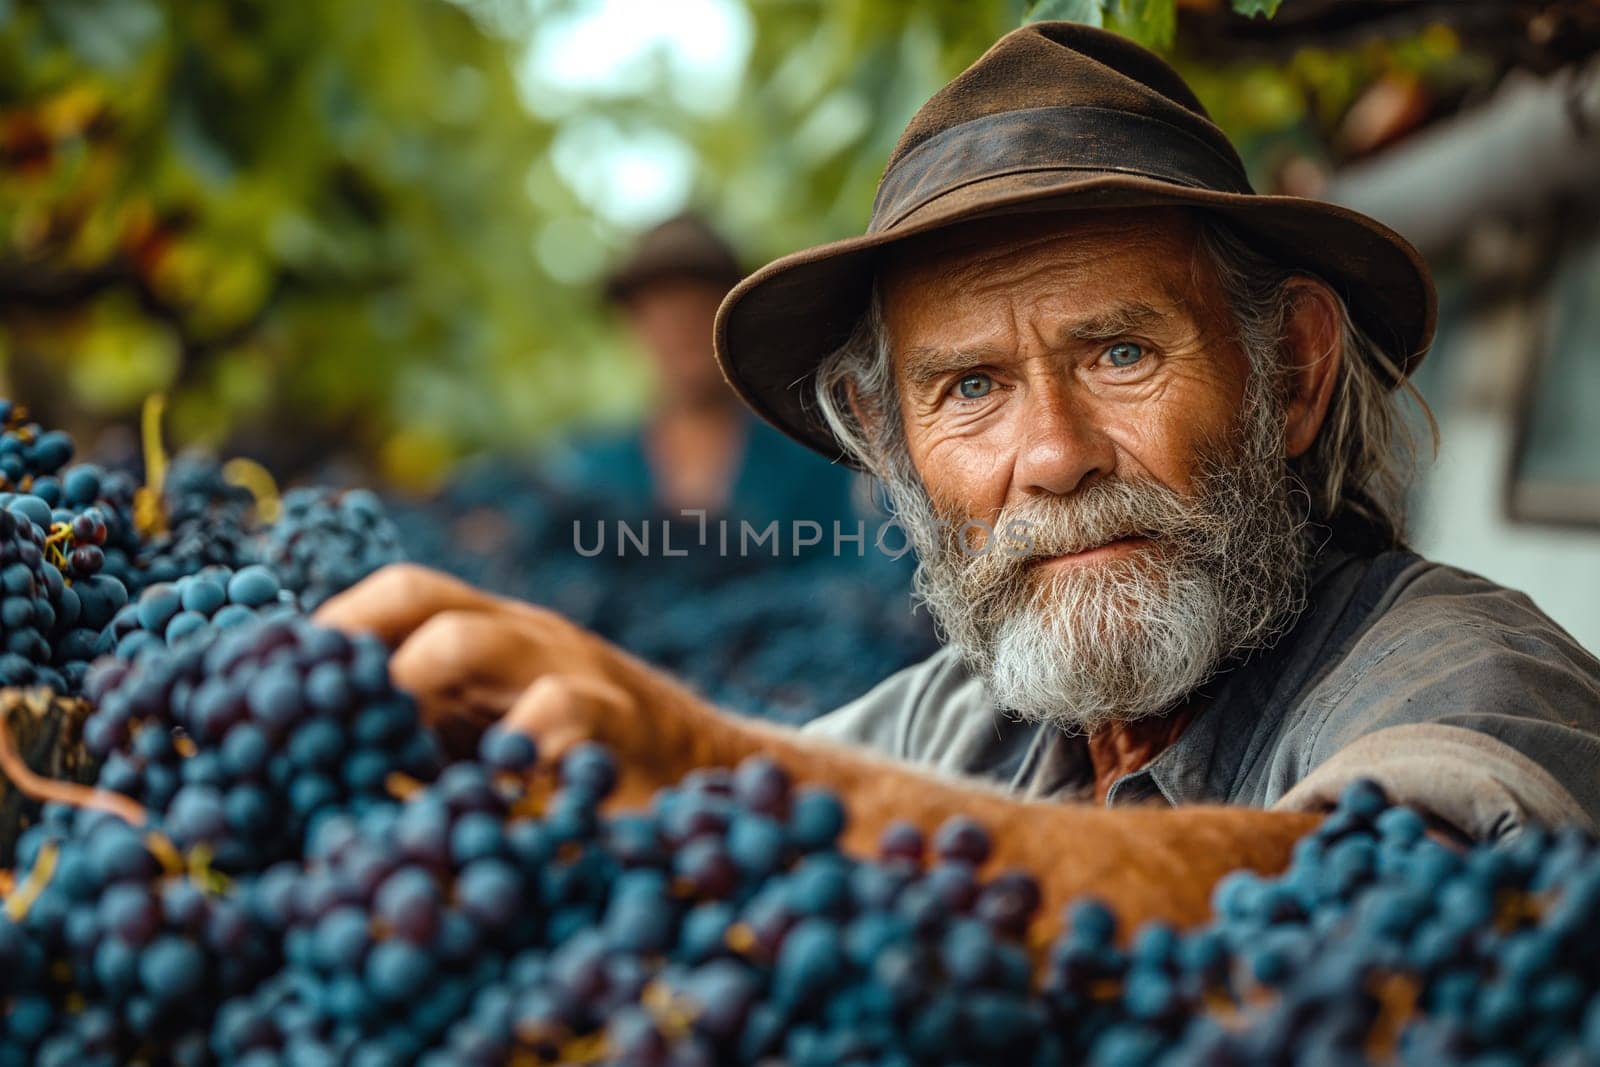 Mature male farmer pours blue grapes into a trailer in a vineyard. by Sd28DimoN_1976